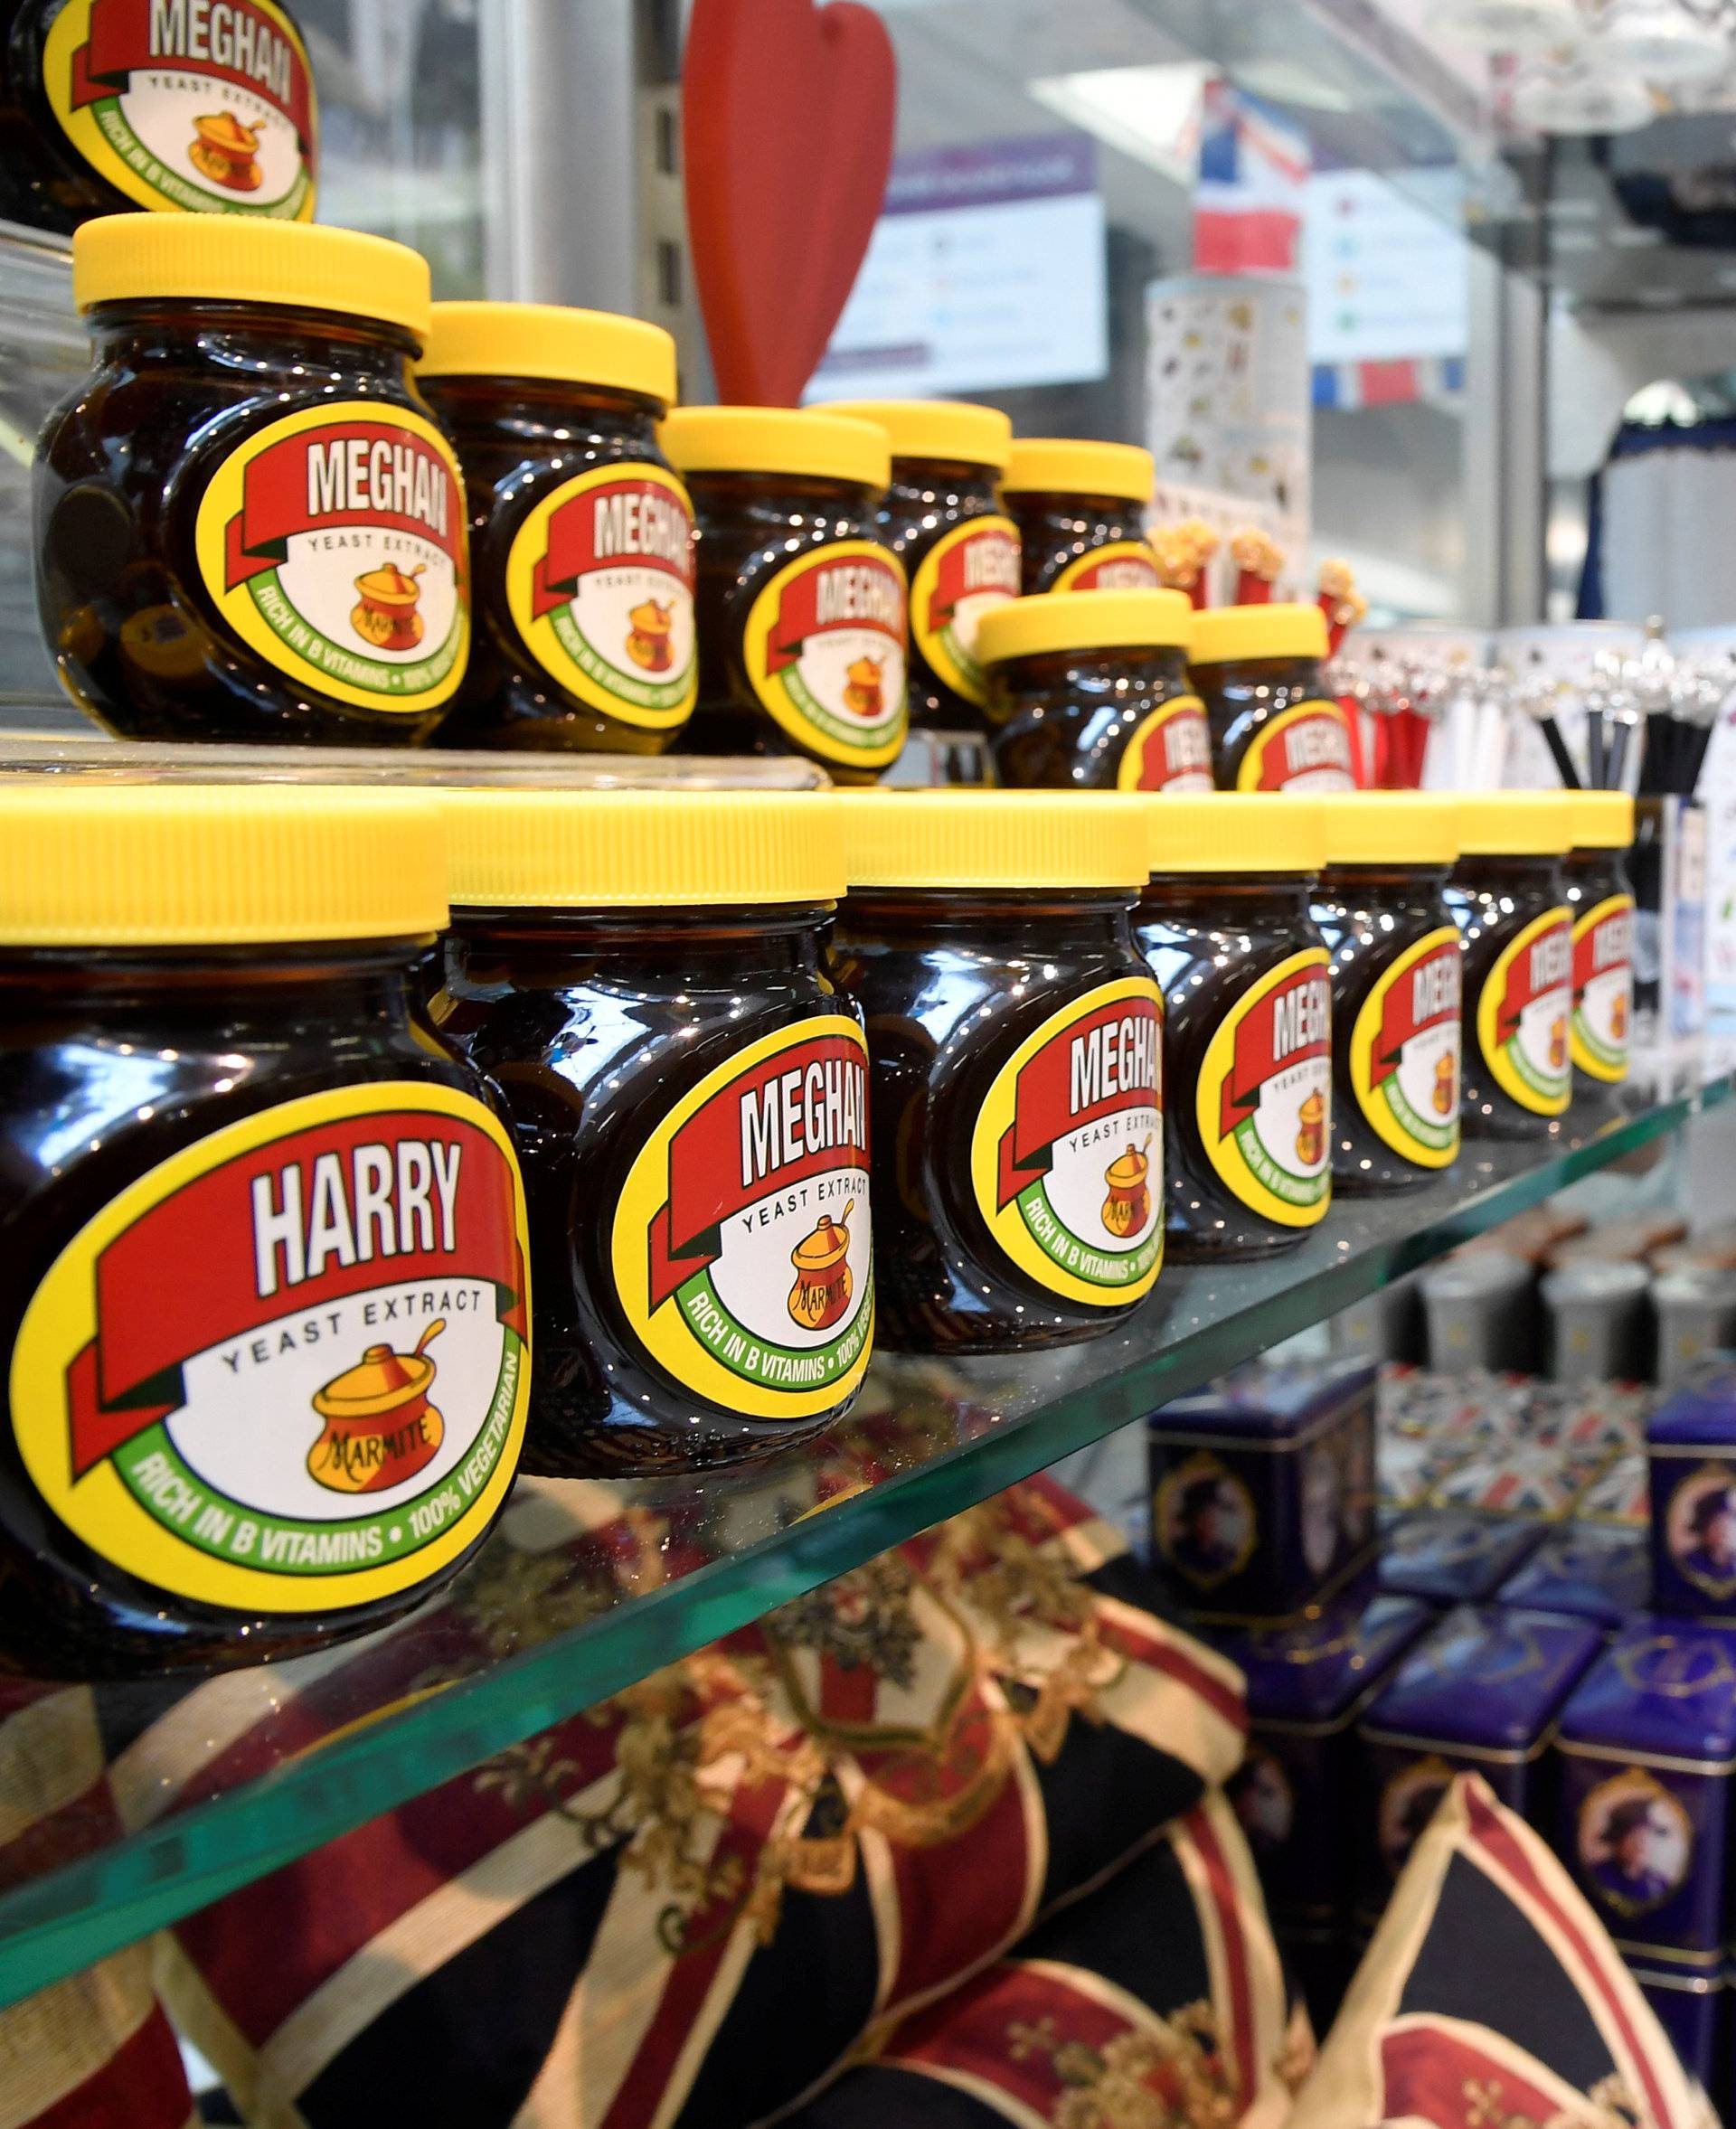 A woman browses near a shelf display with Marmite spread with a redesigned label for the forthcoming wedding of Britain's Prince Harry and his fiancee Meghan Markle in Windsor, Britain